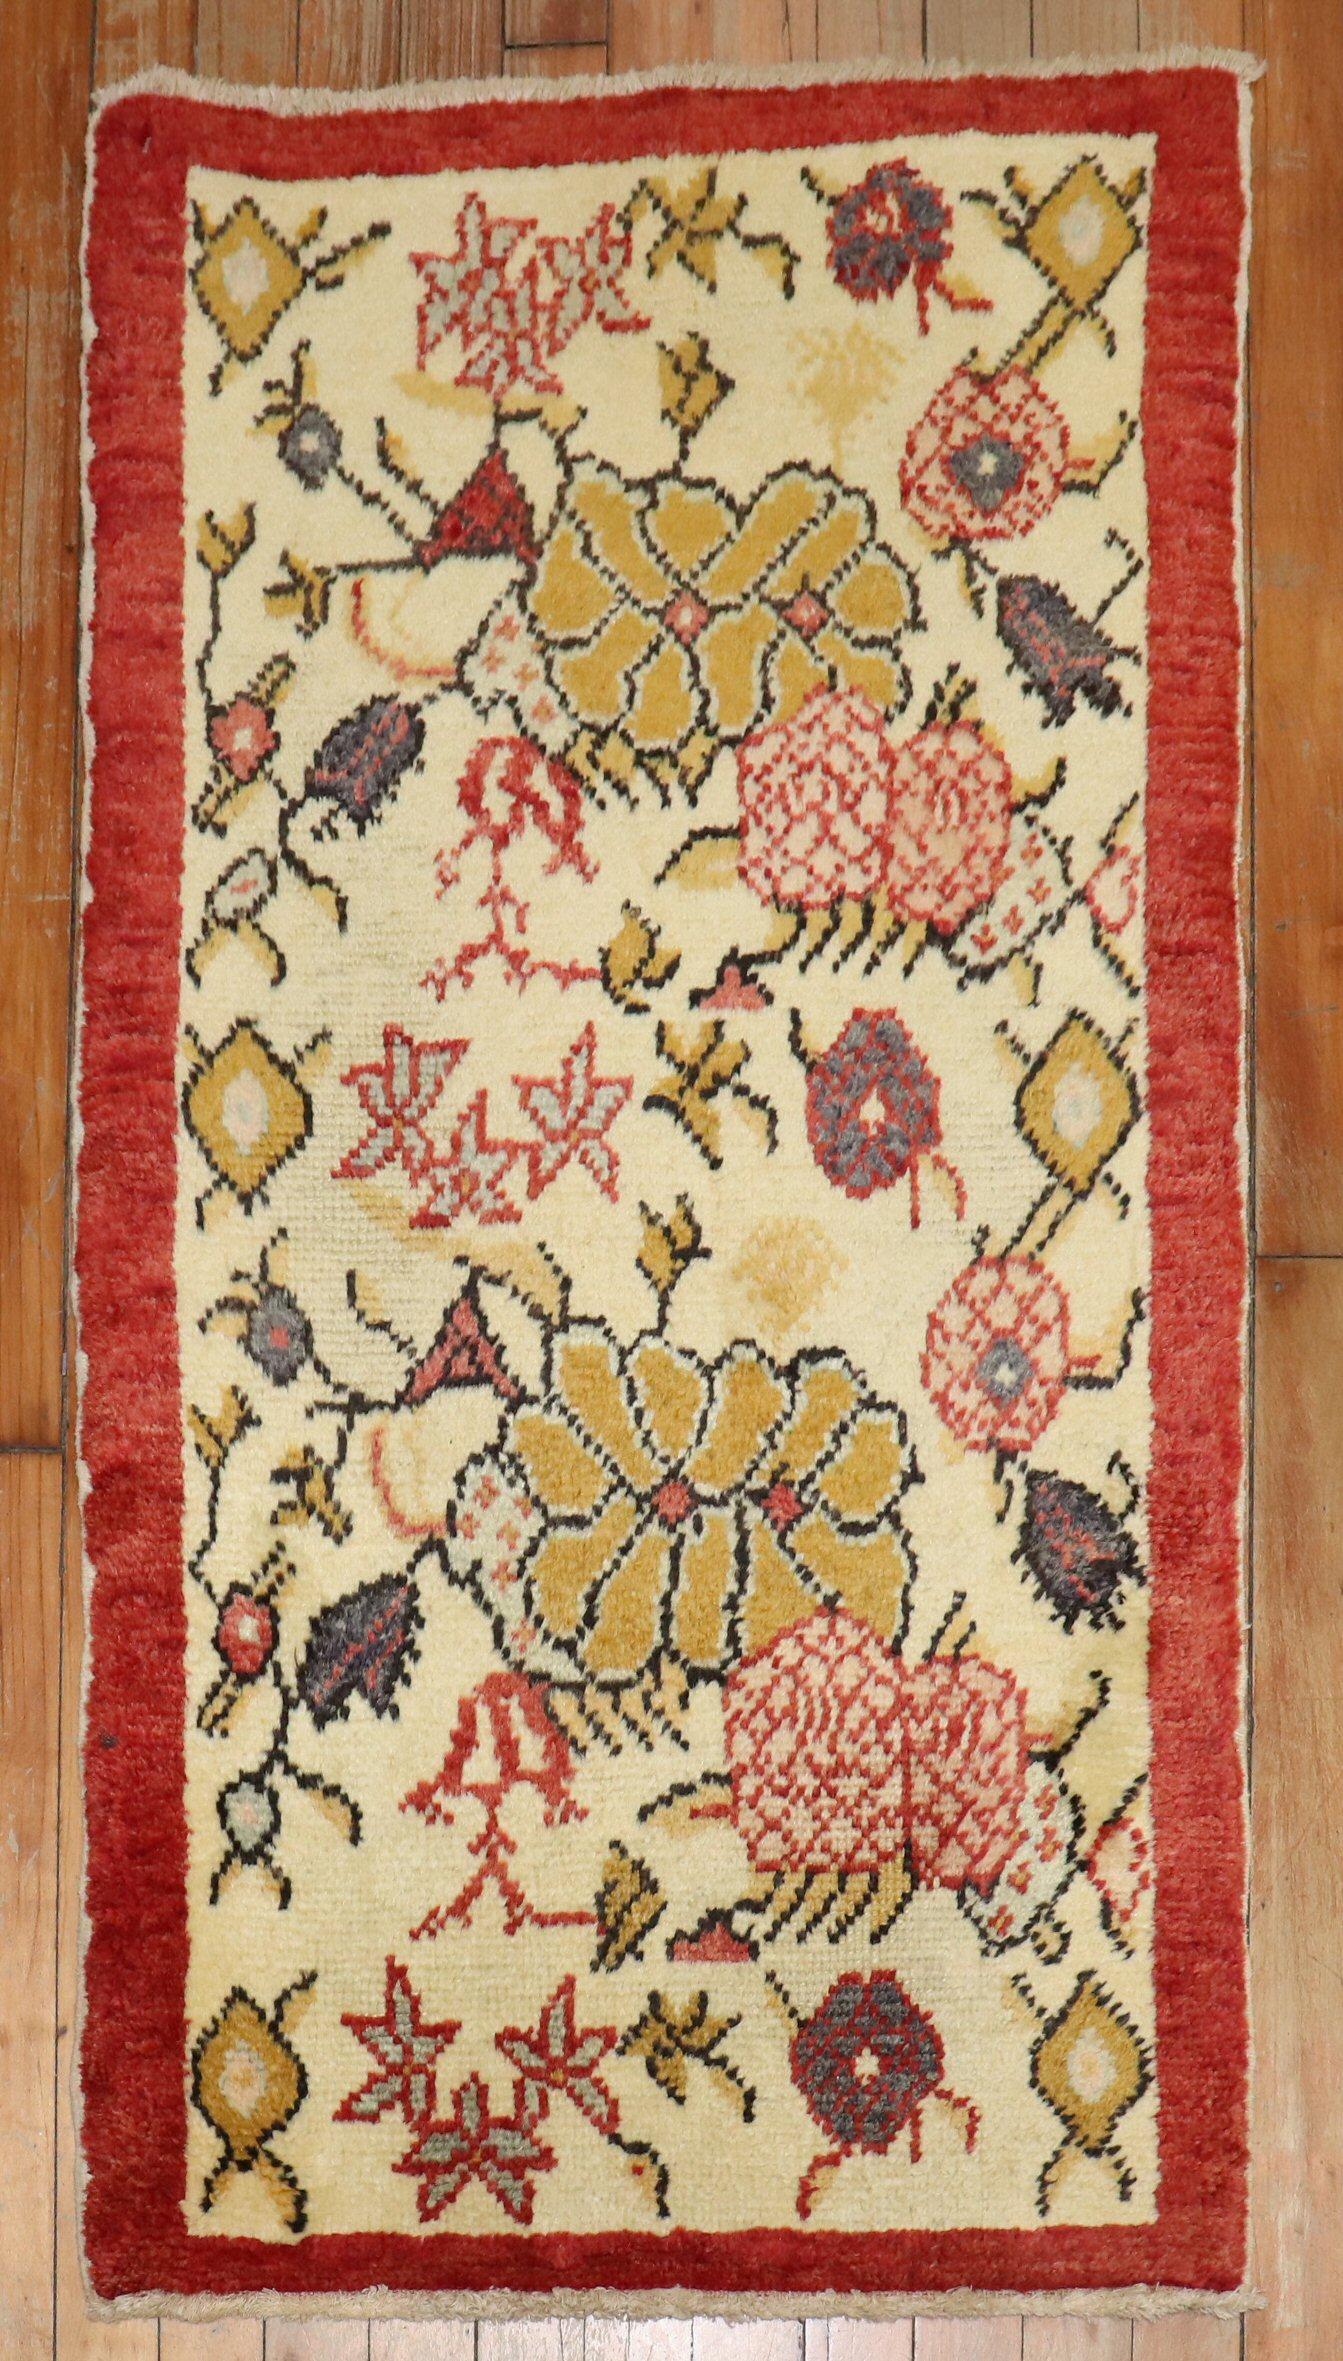 a mid 20th century turkish rug with a floral design on an ivory color ground

2'1'' x 3'9''